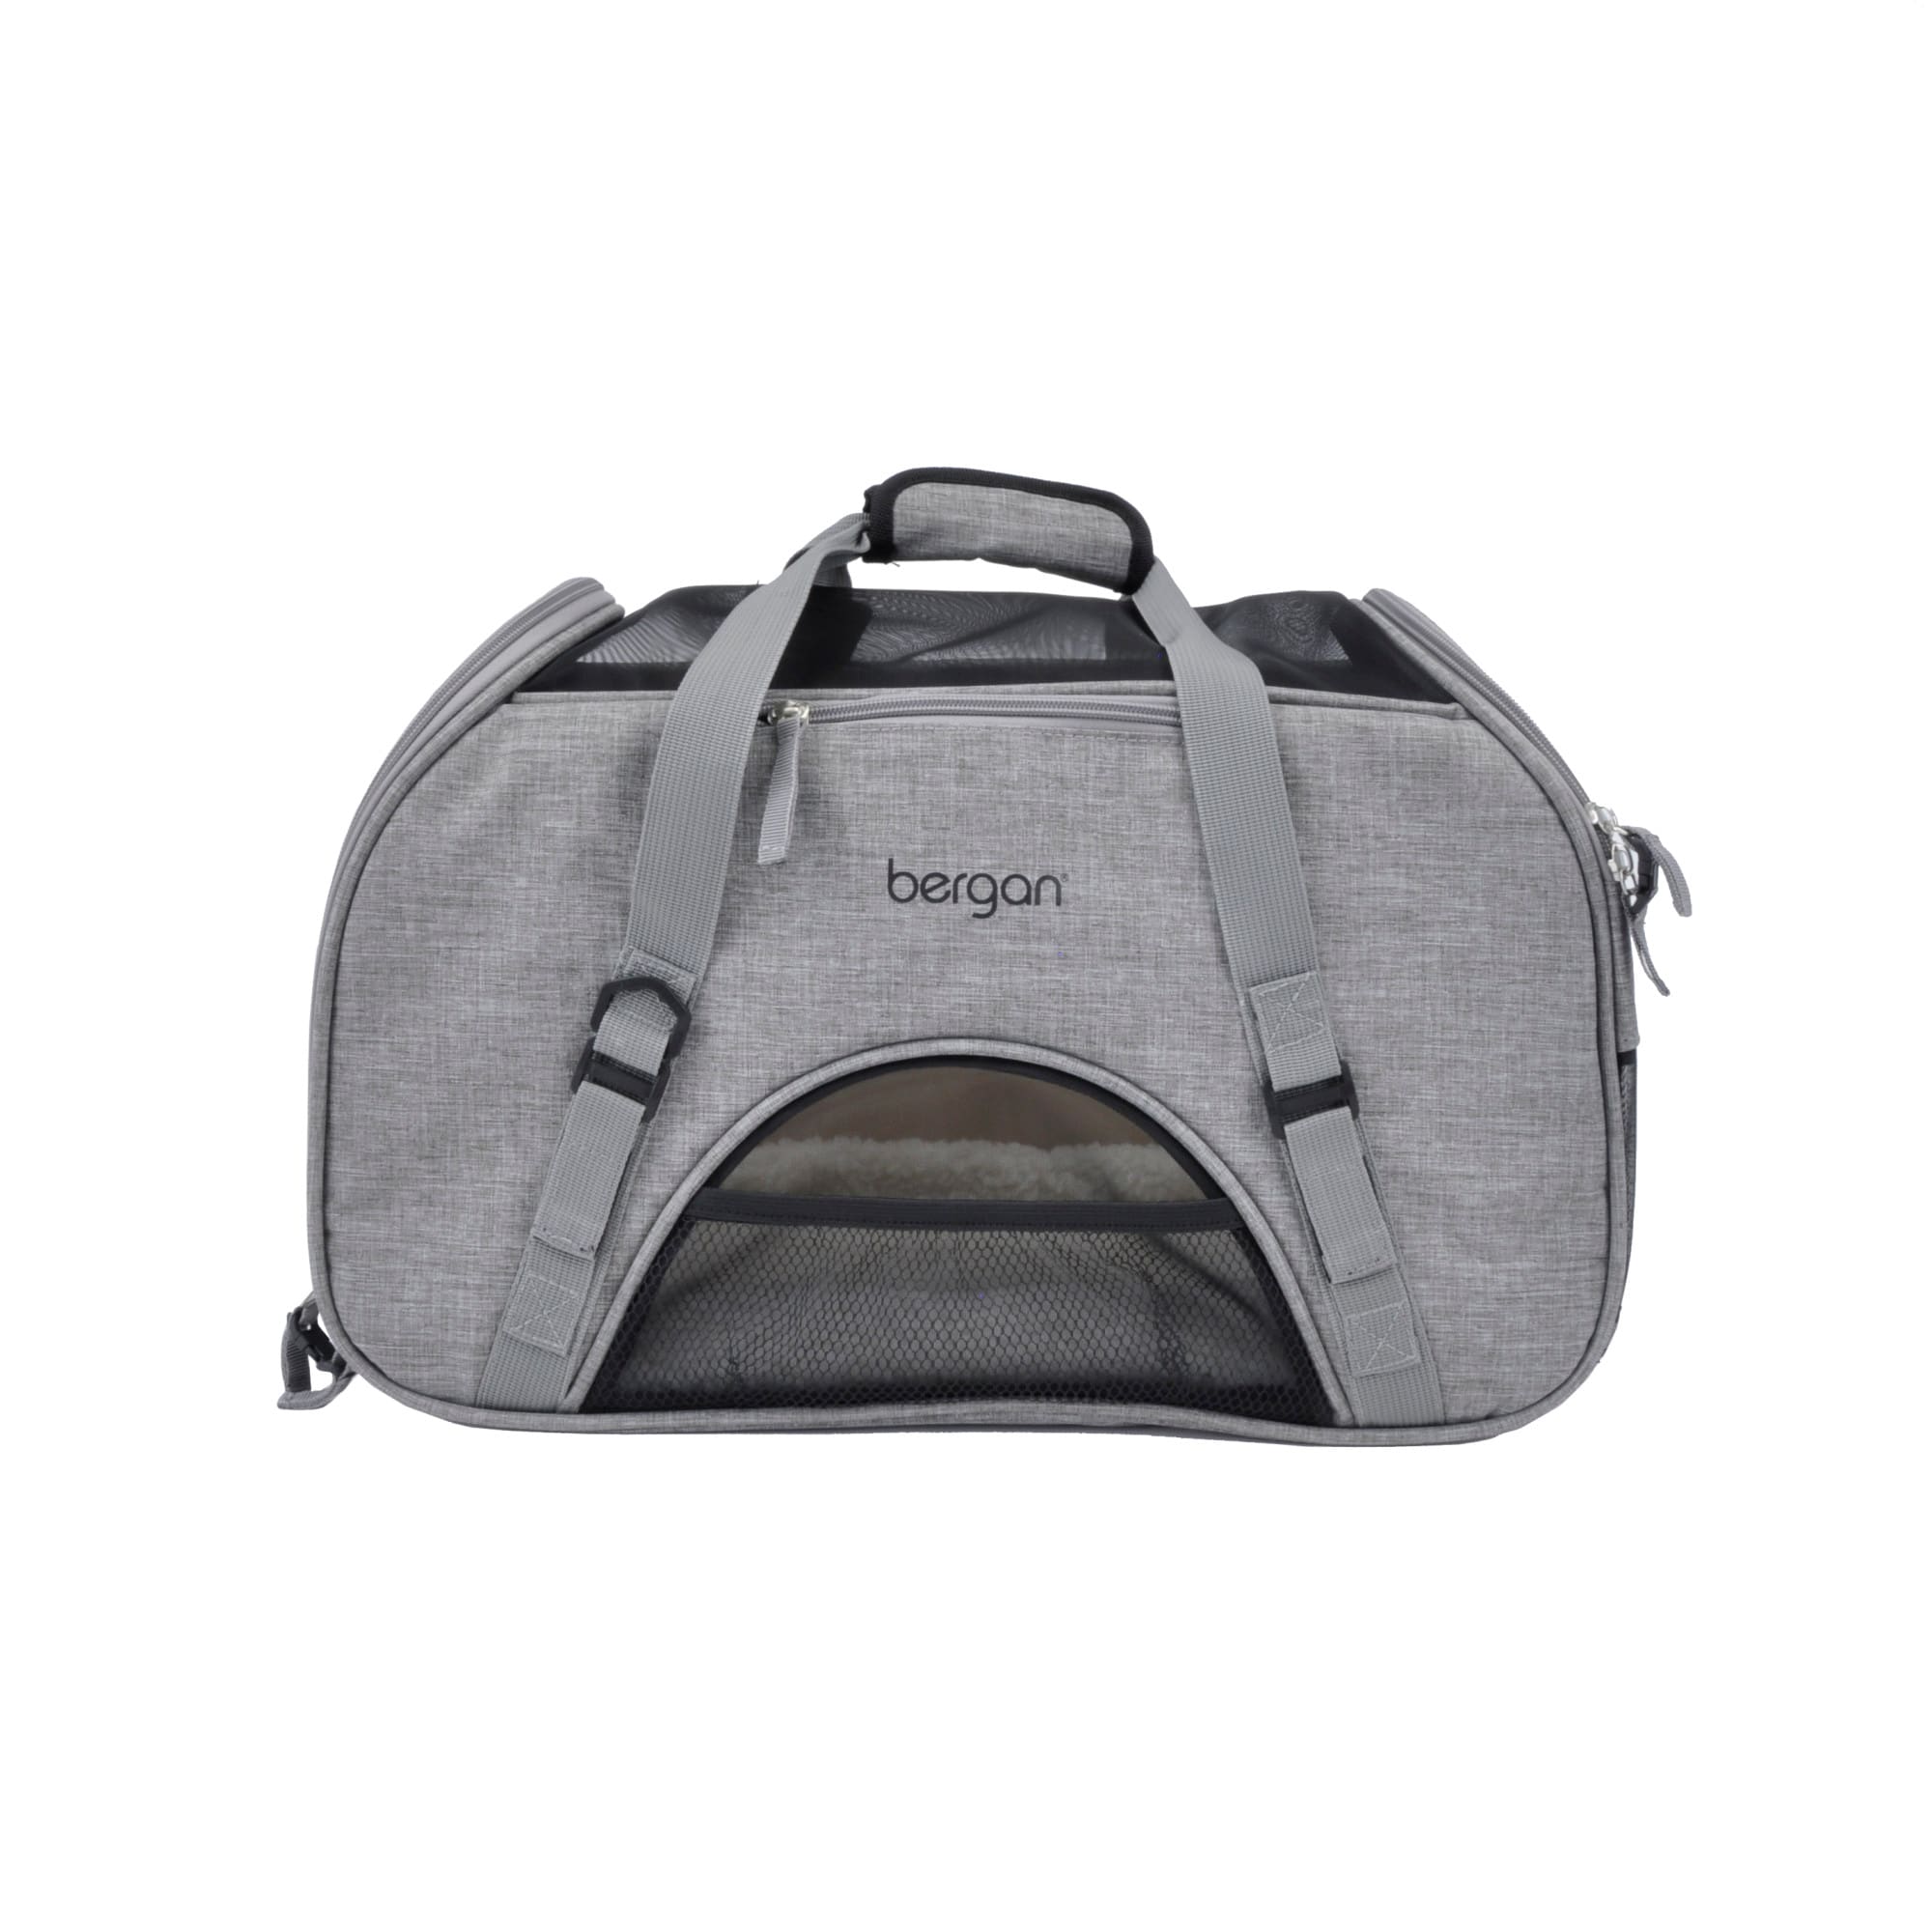 Bergan Heather Grey Comfort Carrier for Dogs, 19" L X 10" W X 13" H, Large